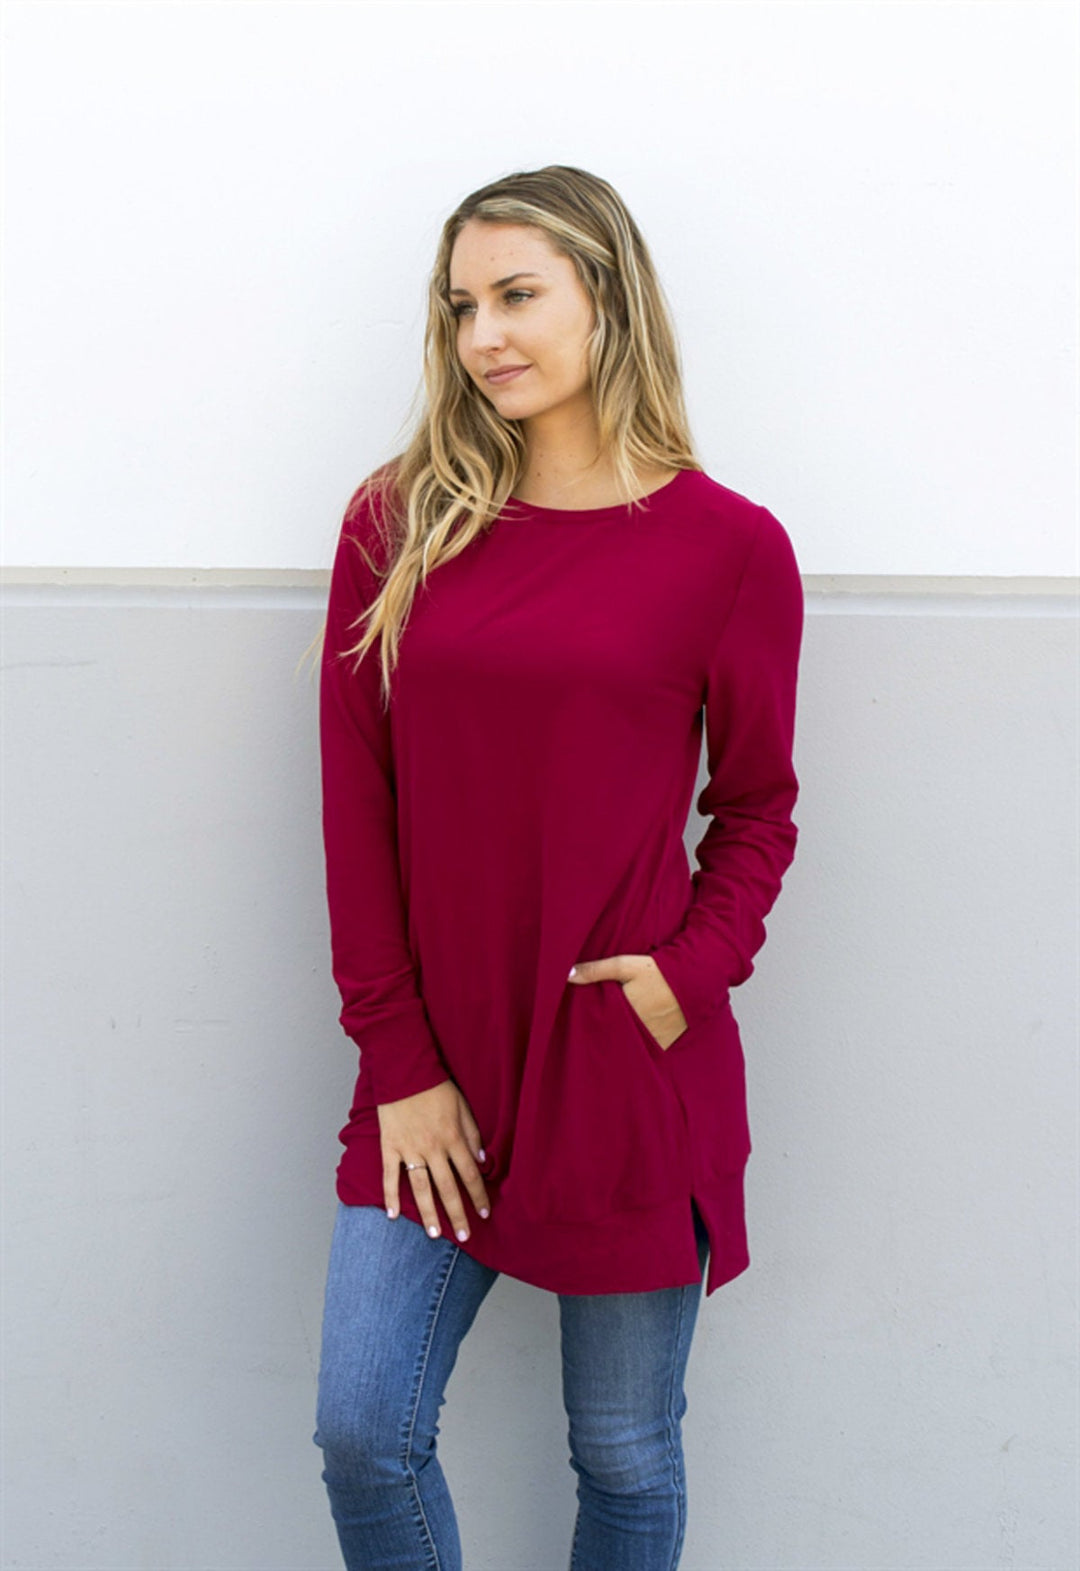 Soft & Cozy Sweater Tunic - Cranberry - Tickled Teal LLC